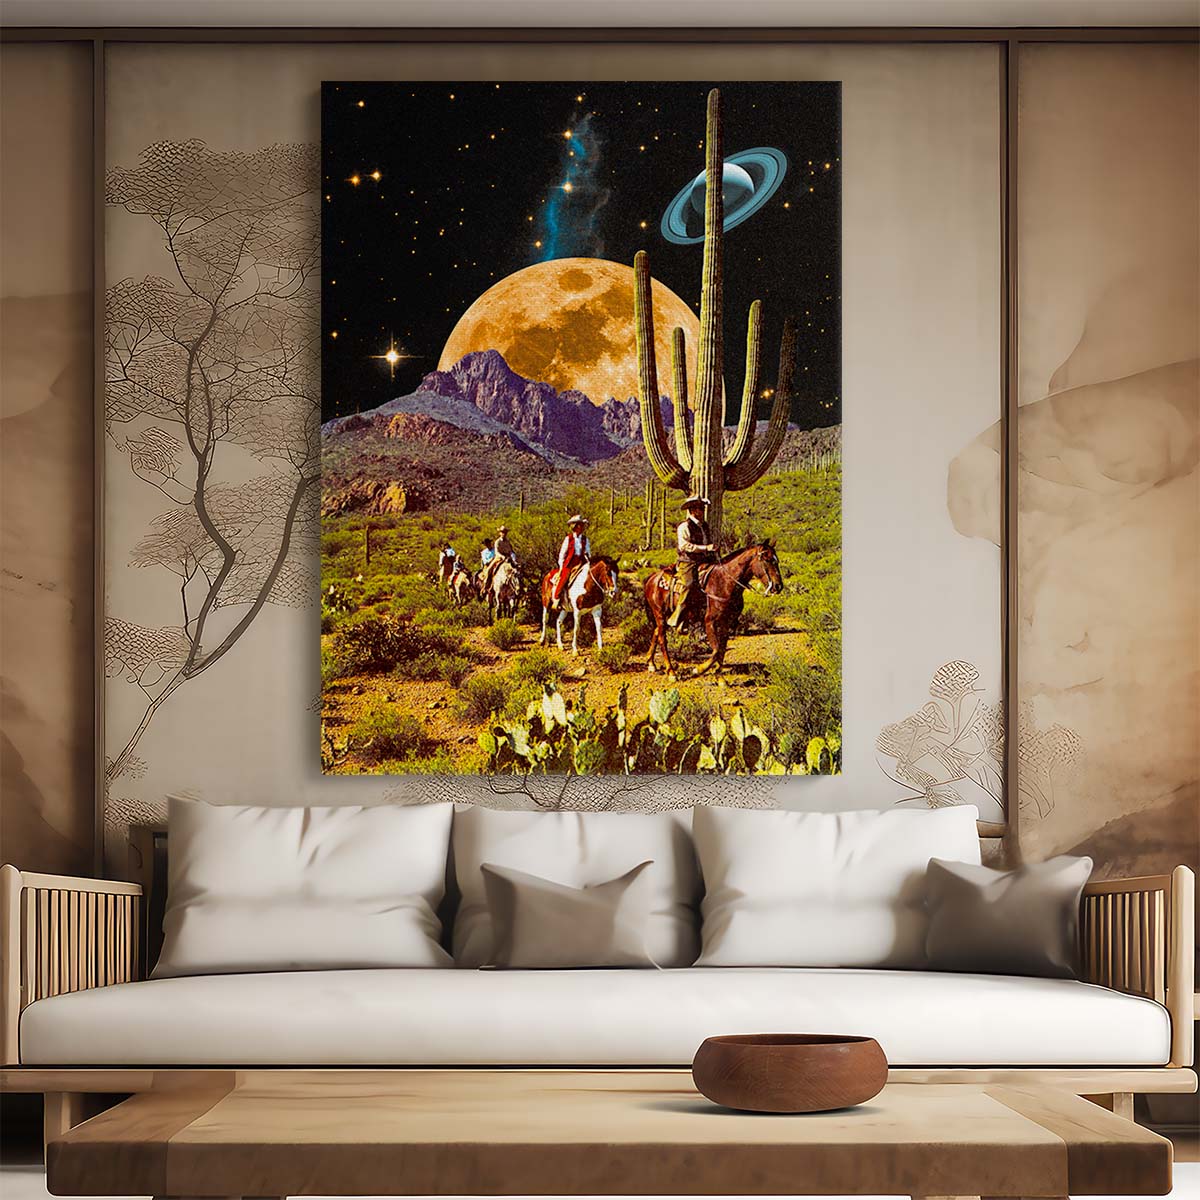 Surreal Retro Futuristic Space Cowboy Collage Illustration Artwork by Luxuriance Designs, made in USA